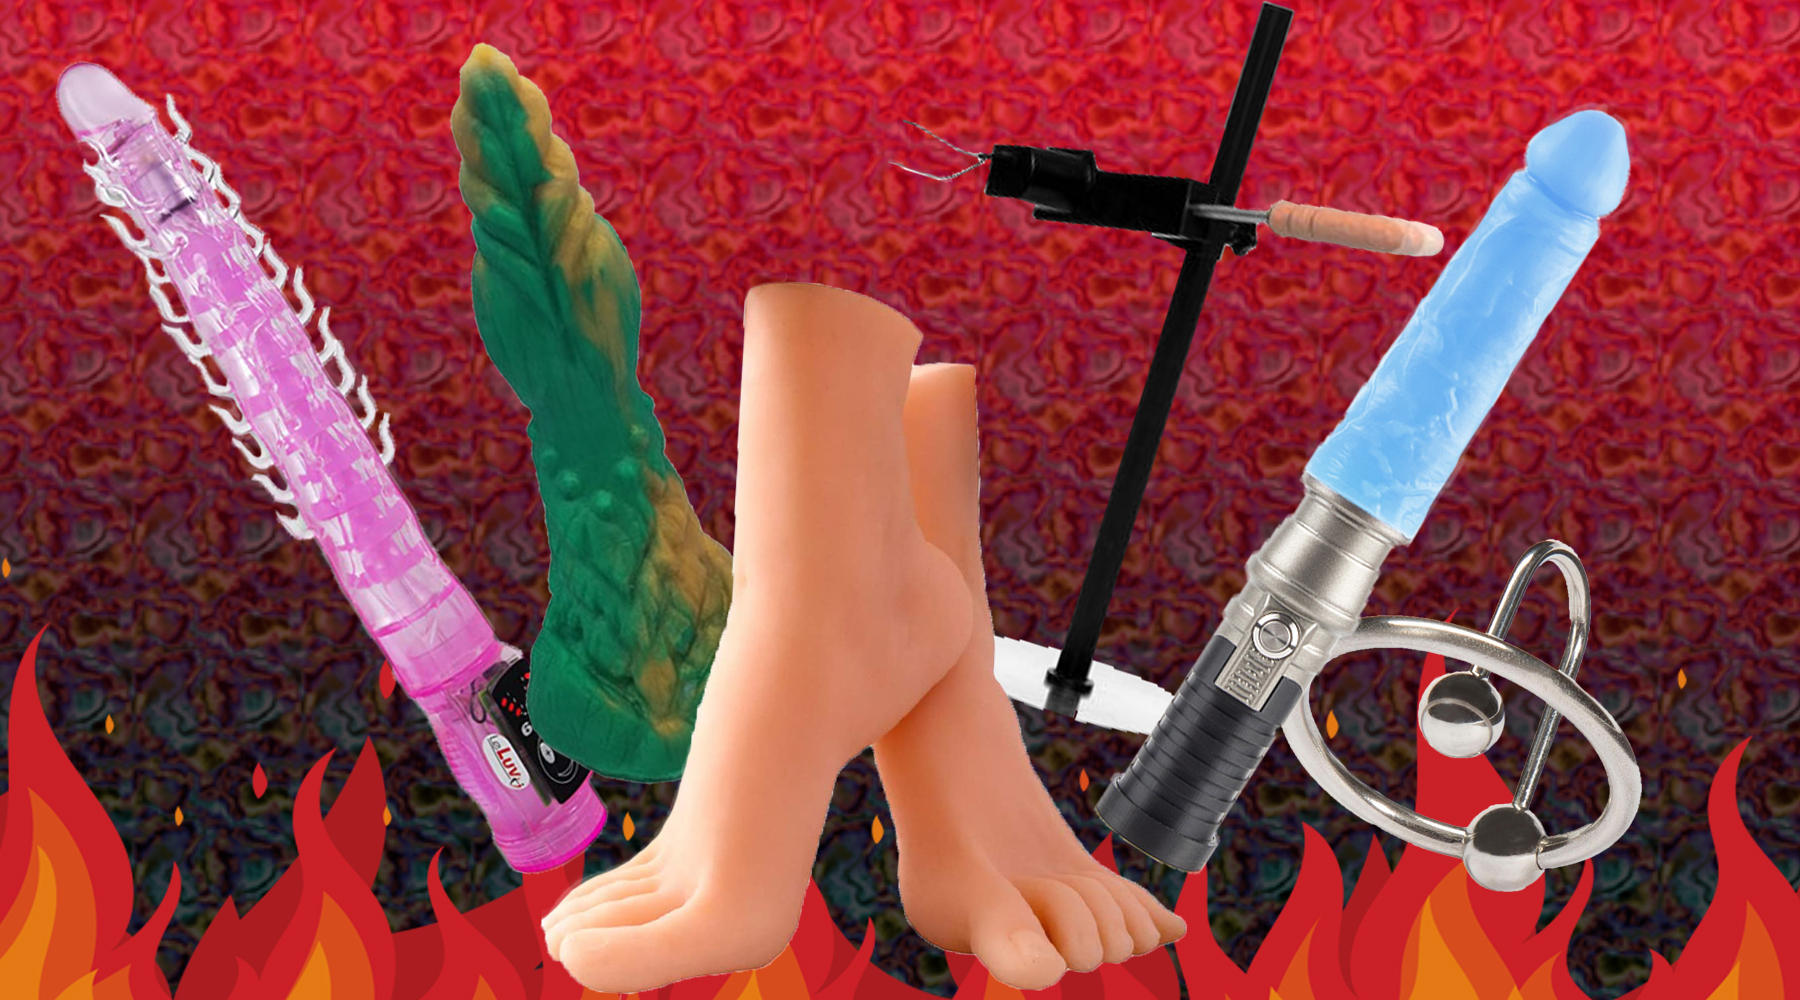 Lets Fry Our Eyes With These Weird and Crazy Sex Toys pic